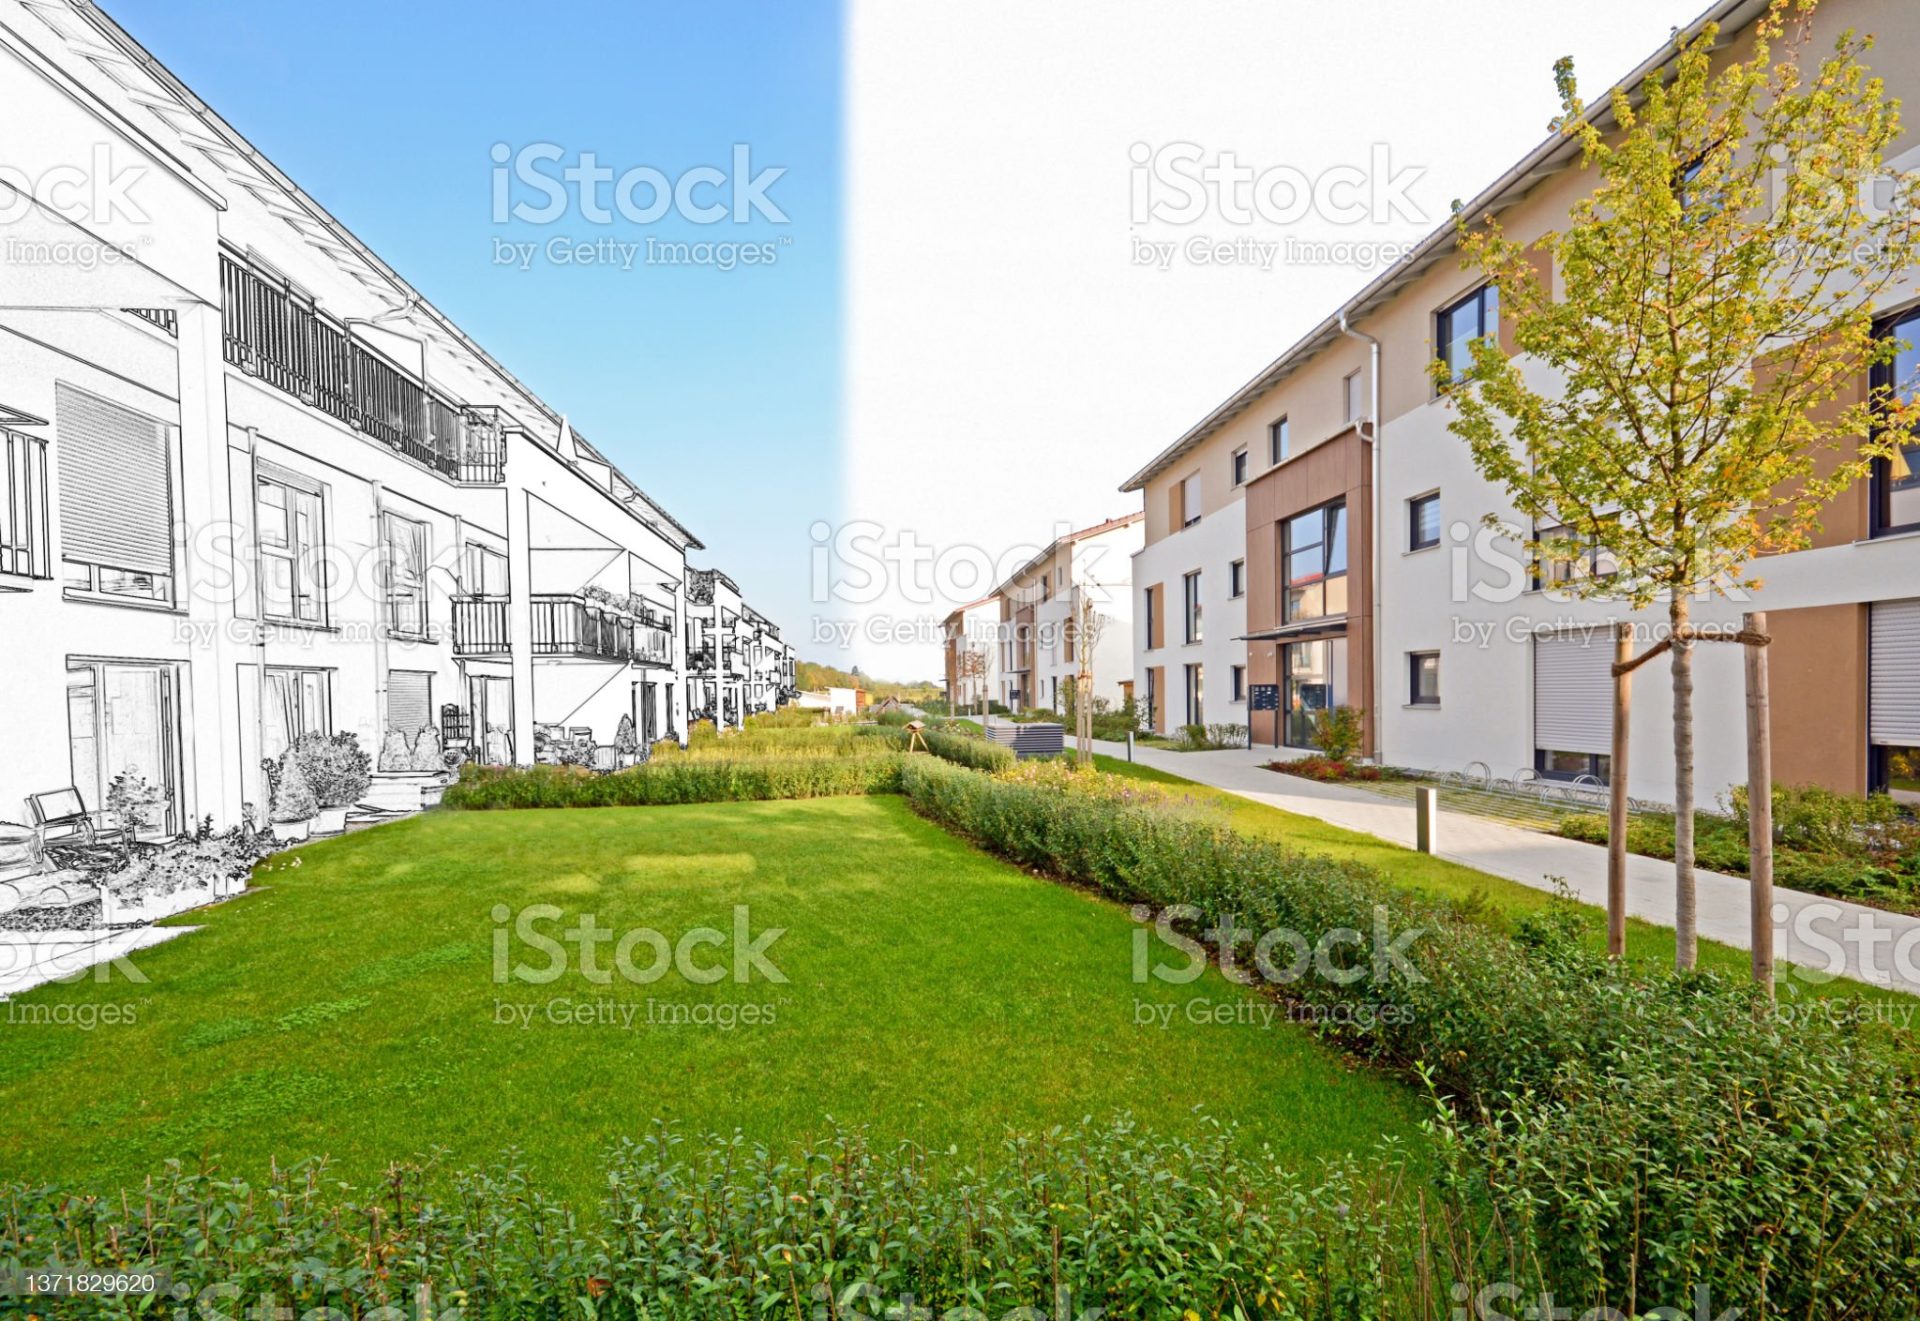 From drawing sketch of a residential area to construction completion of modern apartment buildings, new green urban landscape in the city